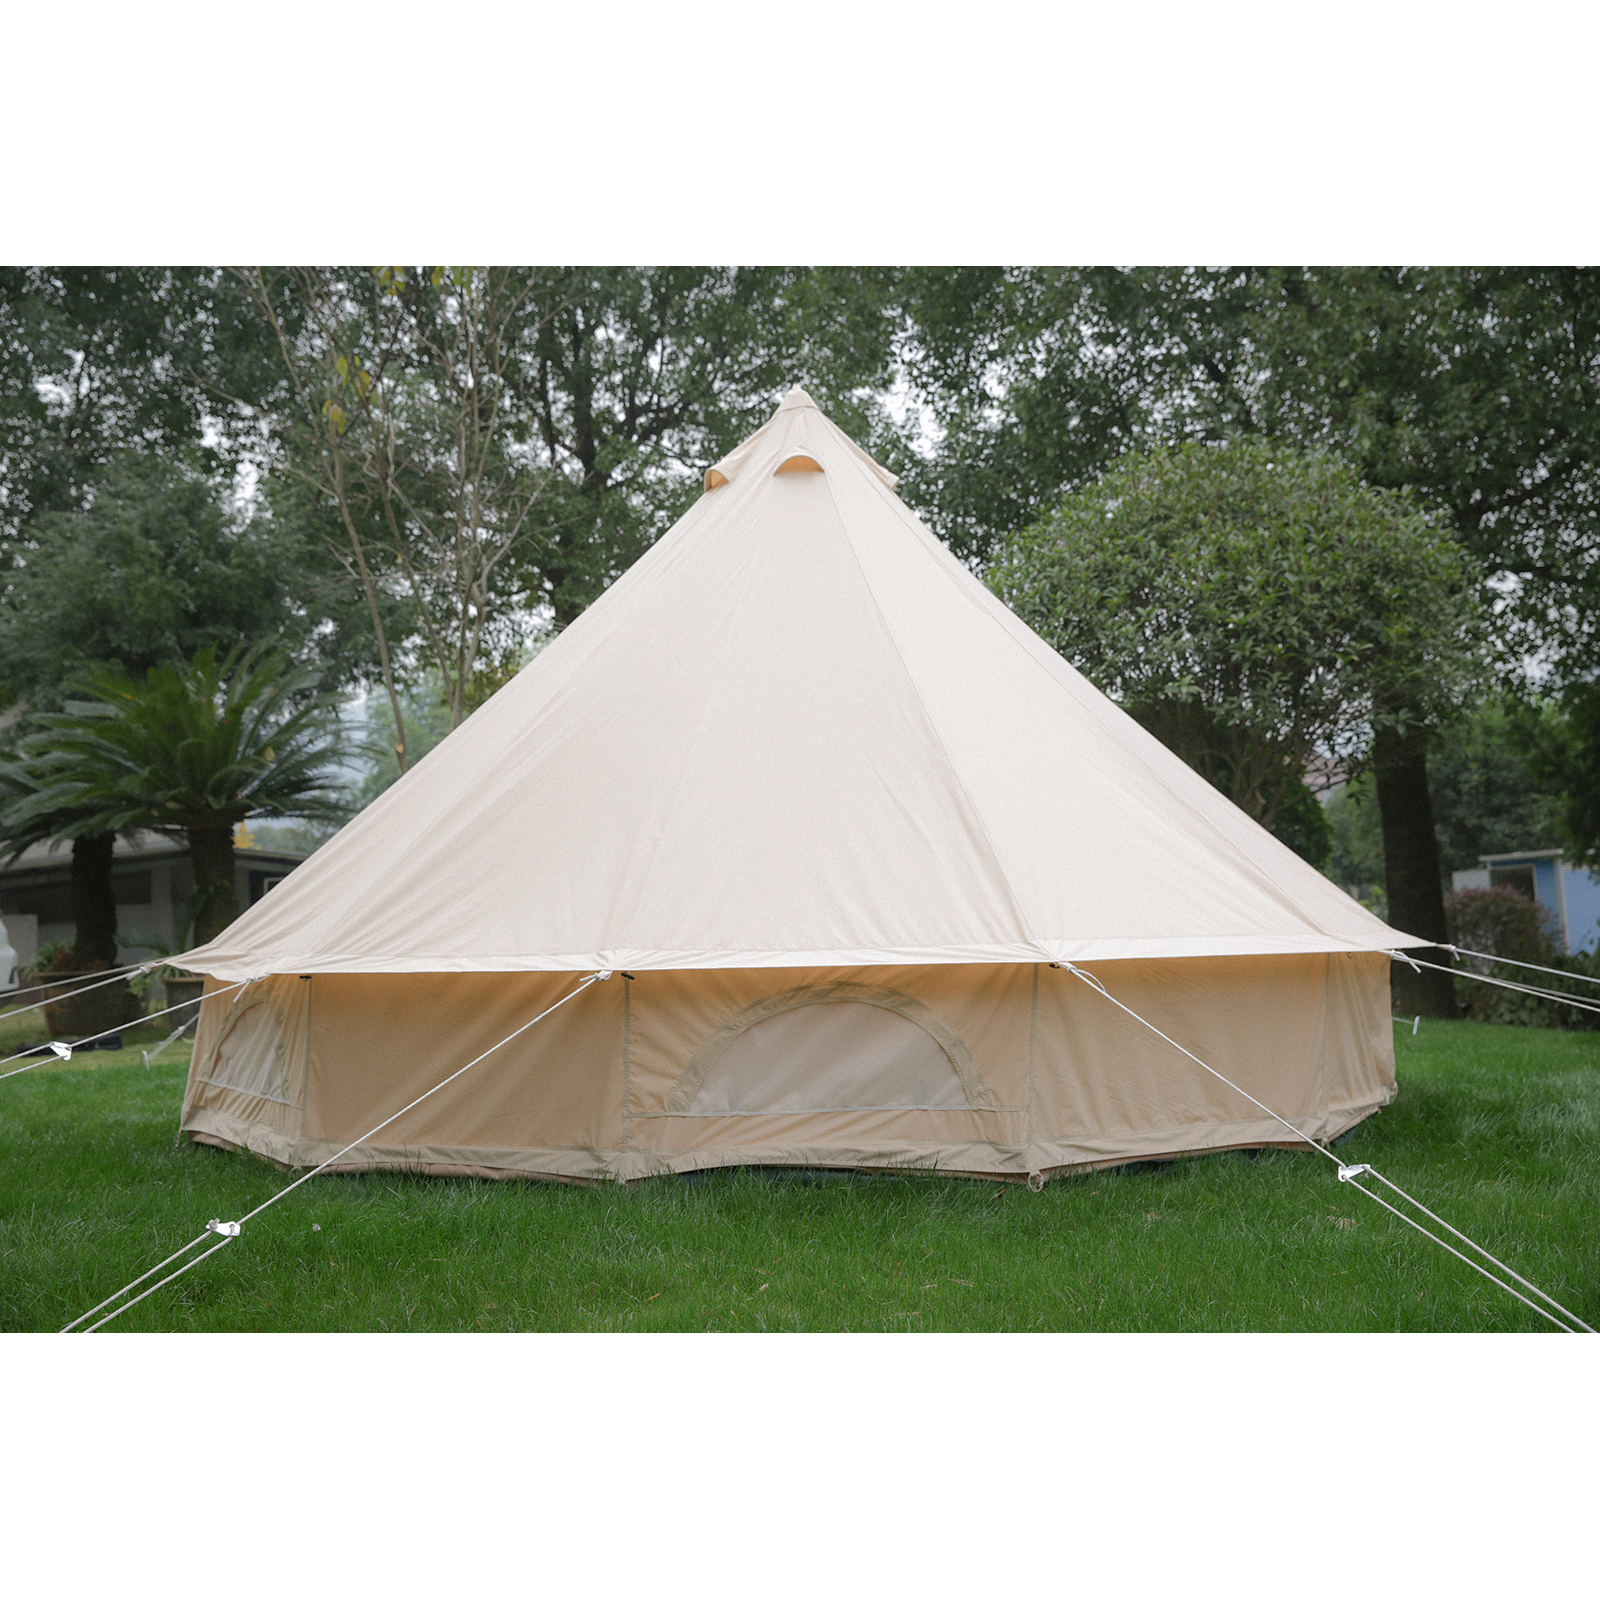 What To Take Into Consideration When Choosing a New Tent